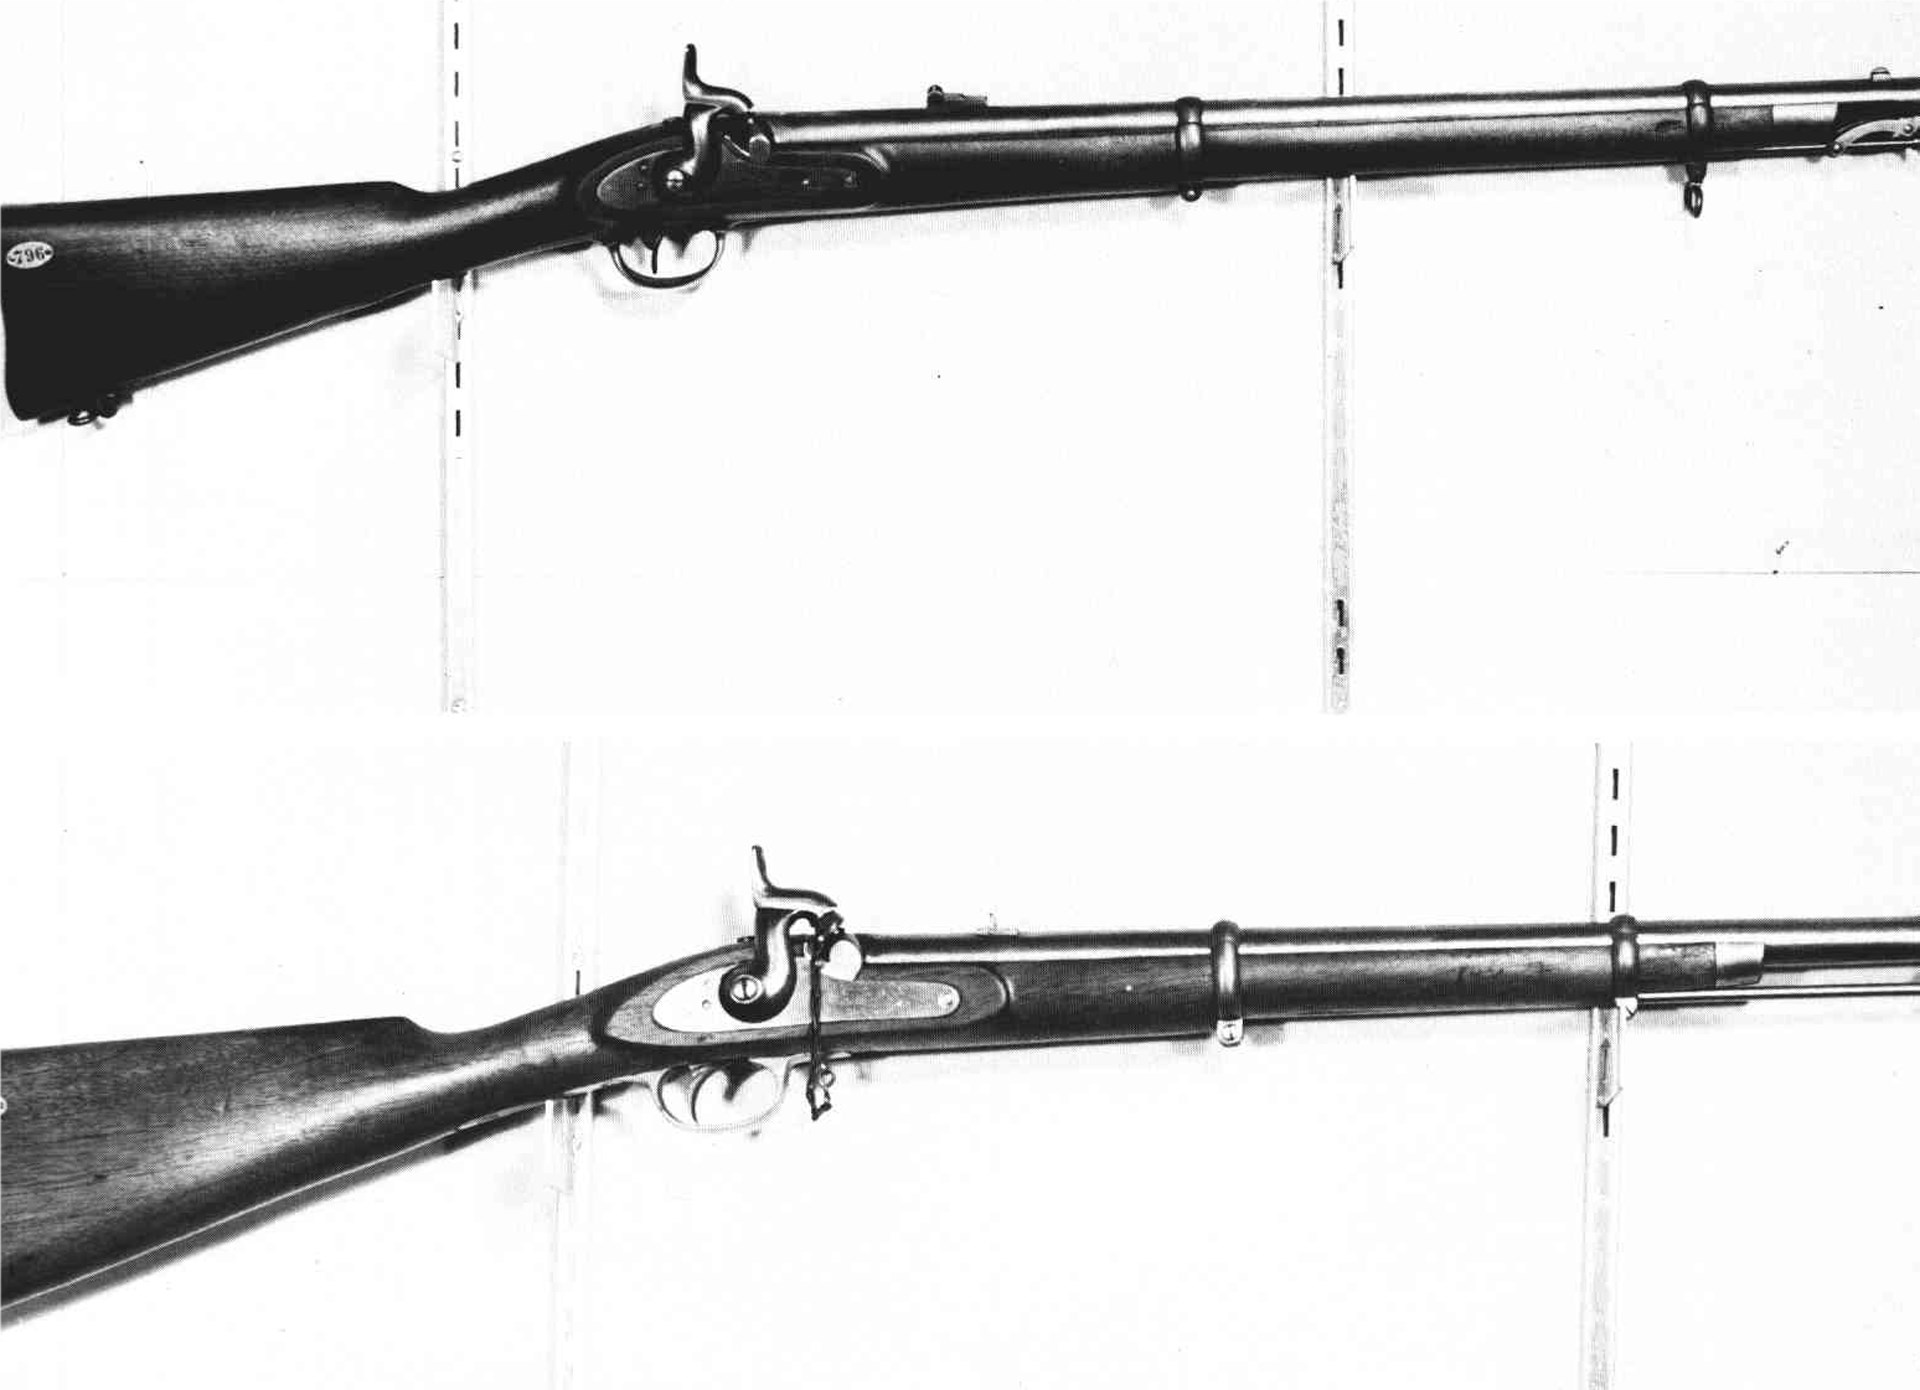 Two Tallassee carbines on white wall